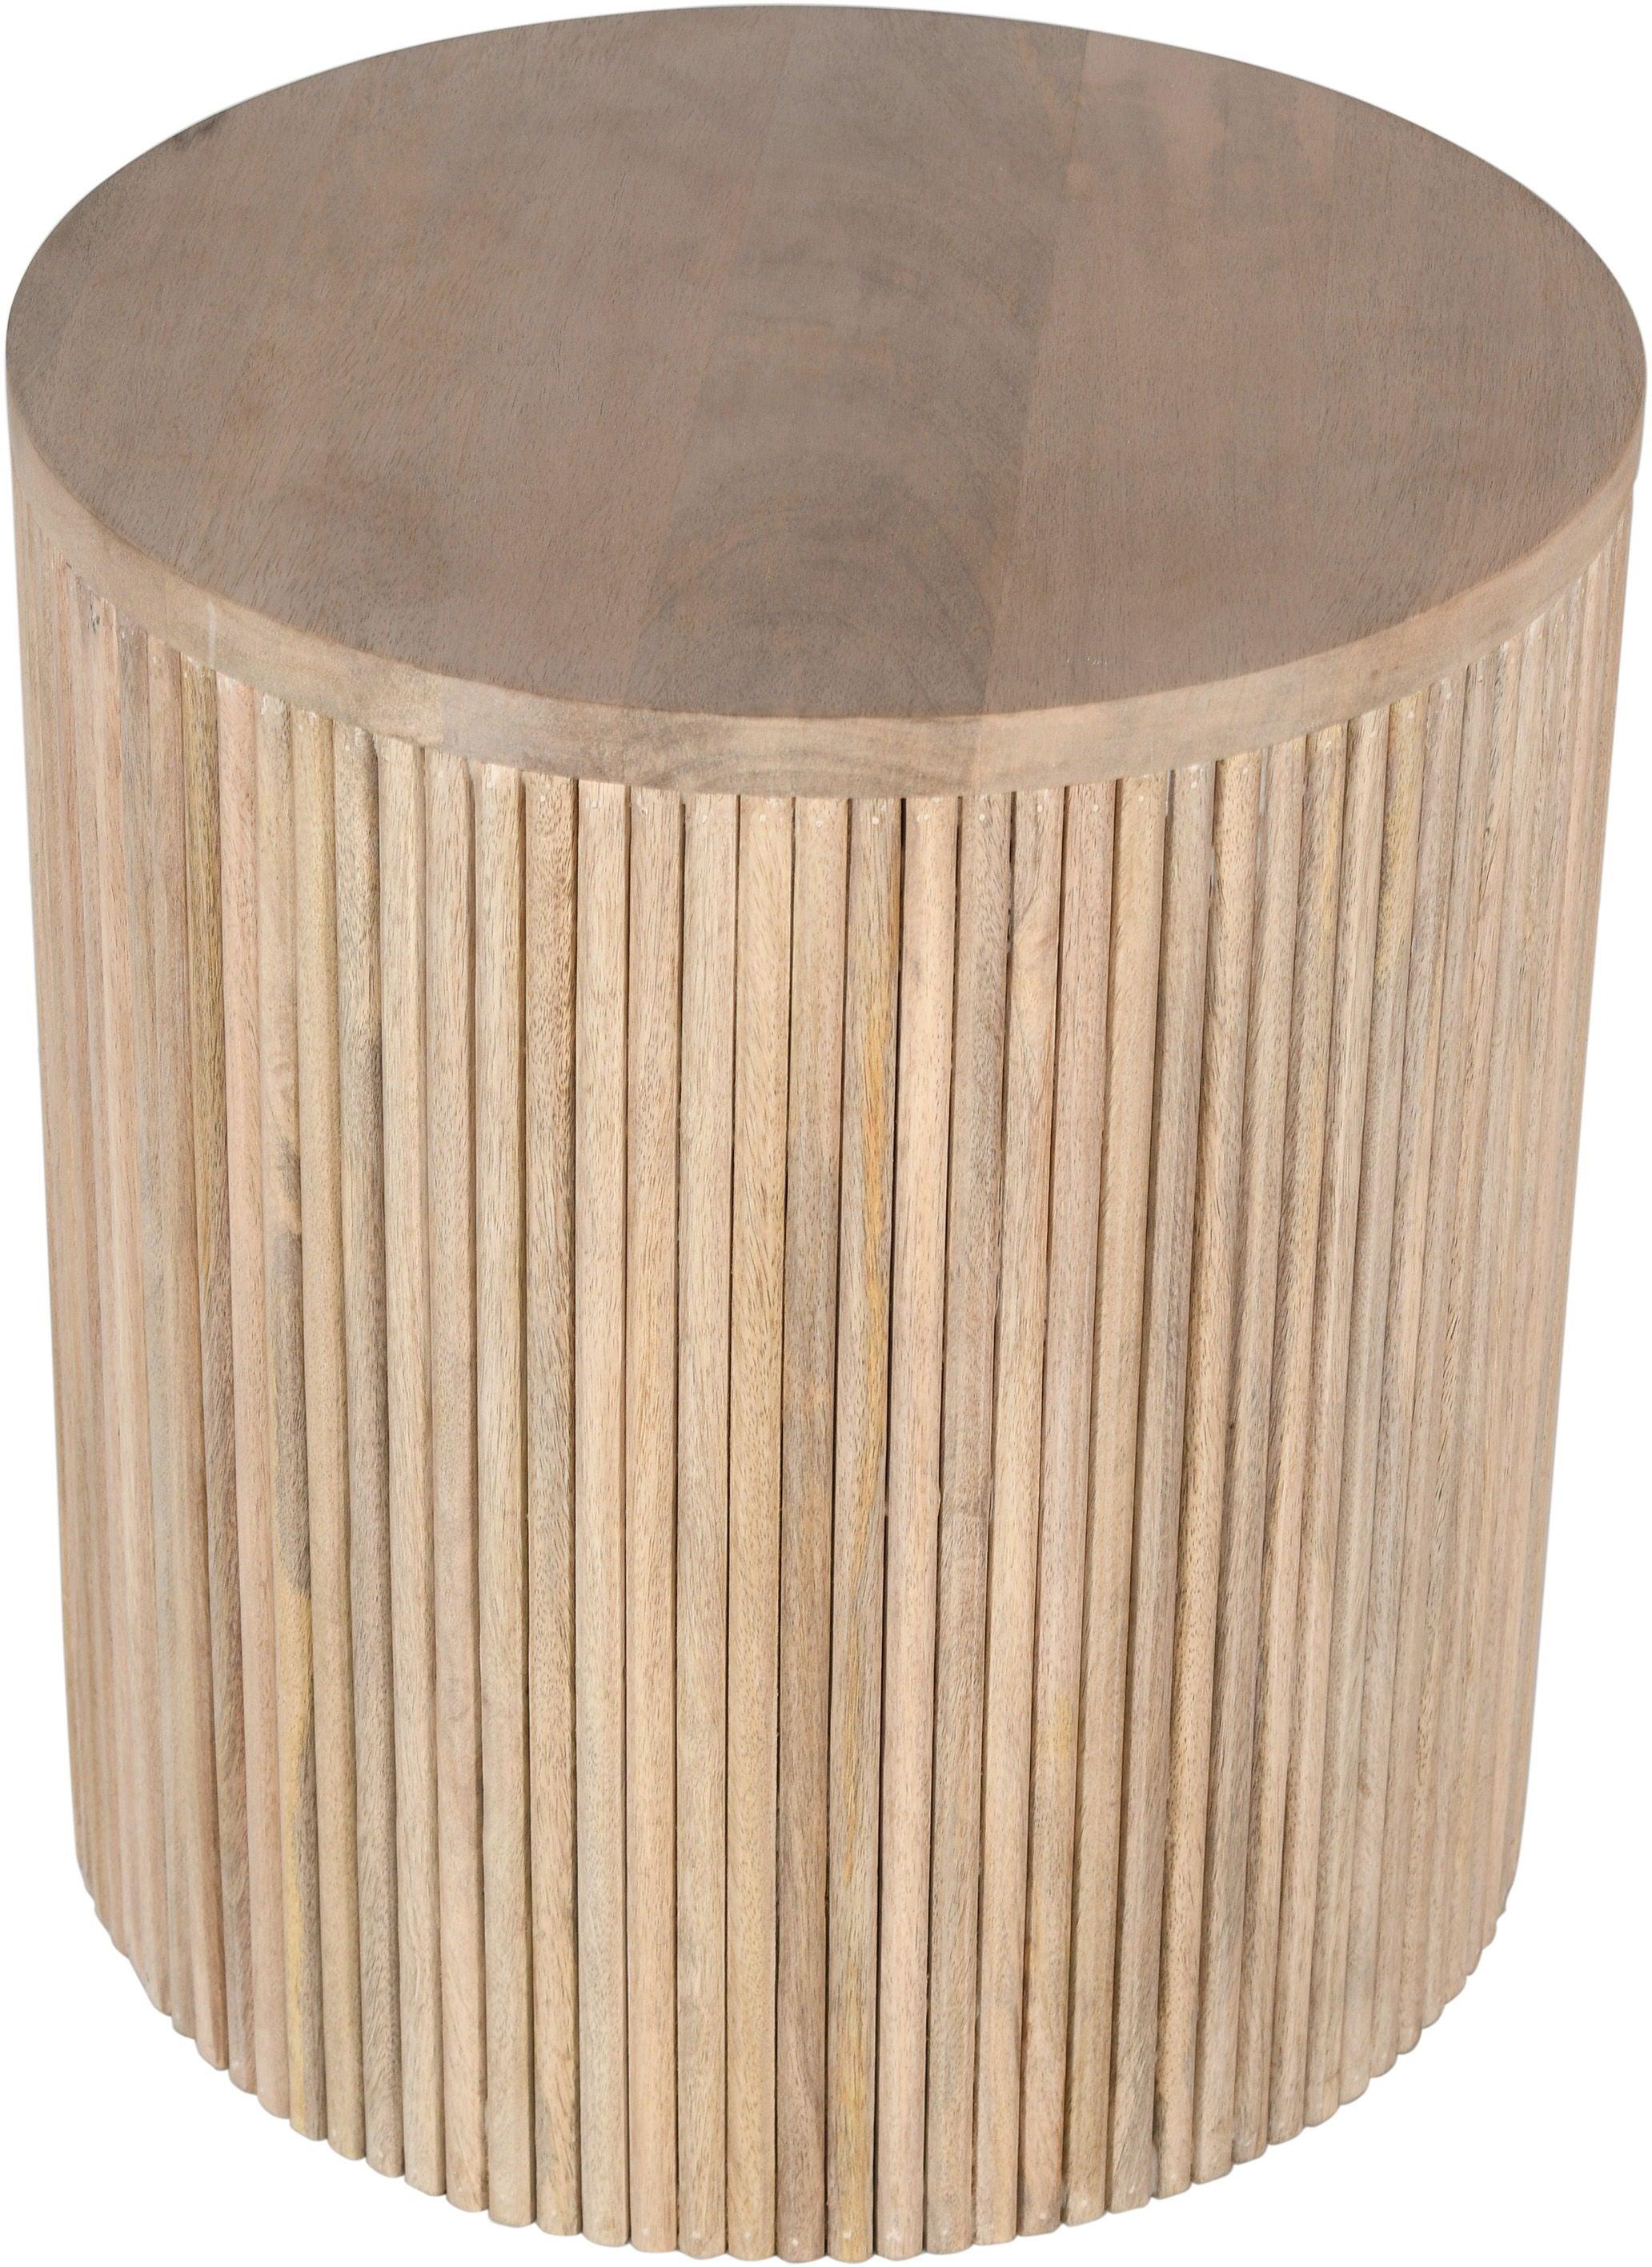 Meridian Furniture - Oakhill - End Table - Natural - 5th Avenue Furniture